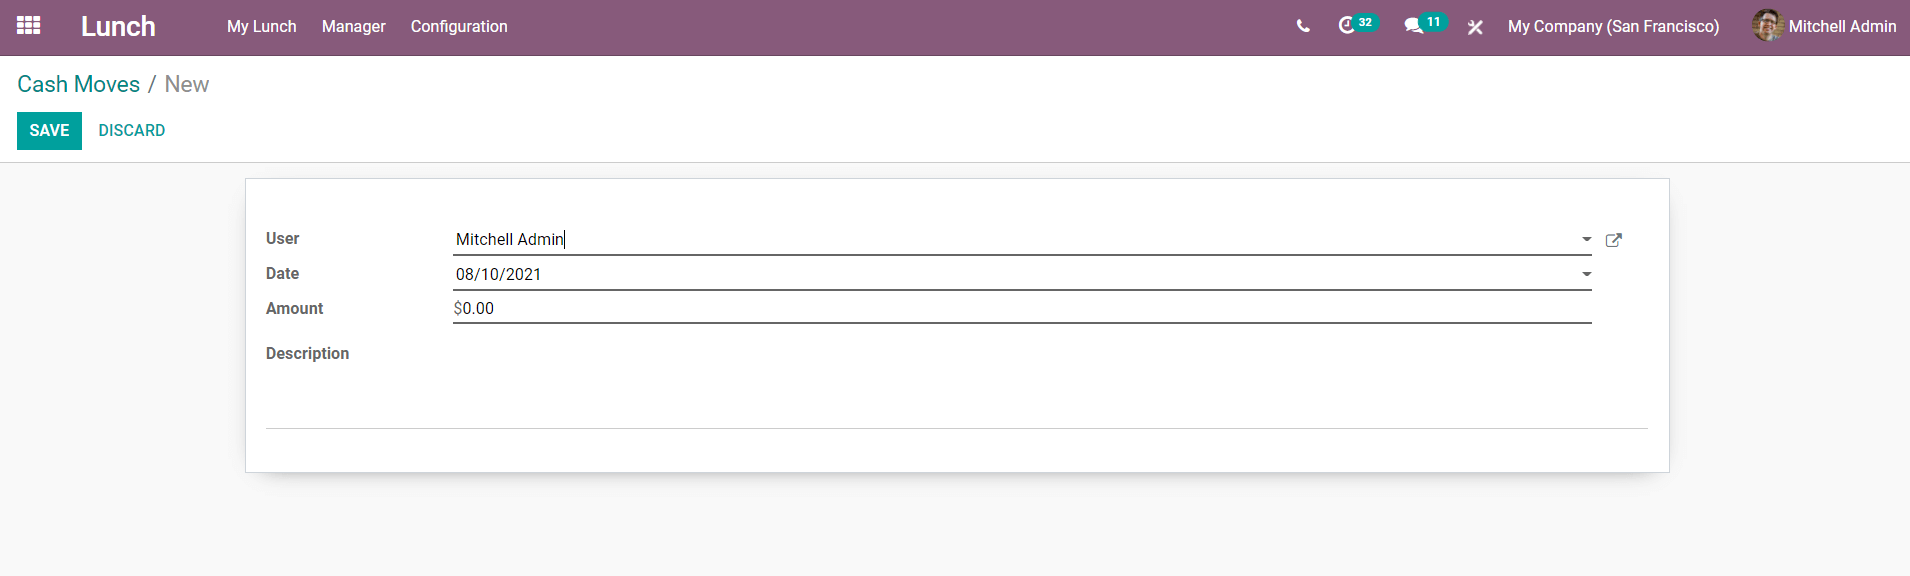 dynamic-usage-of-lunch-module-and-product-configuration-in-odoo-14